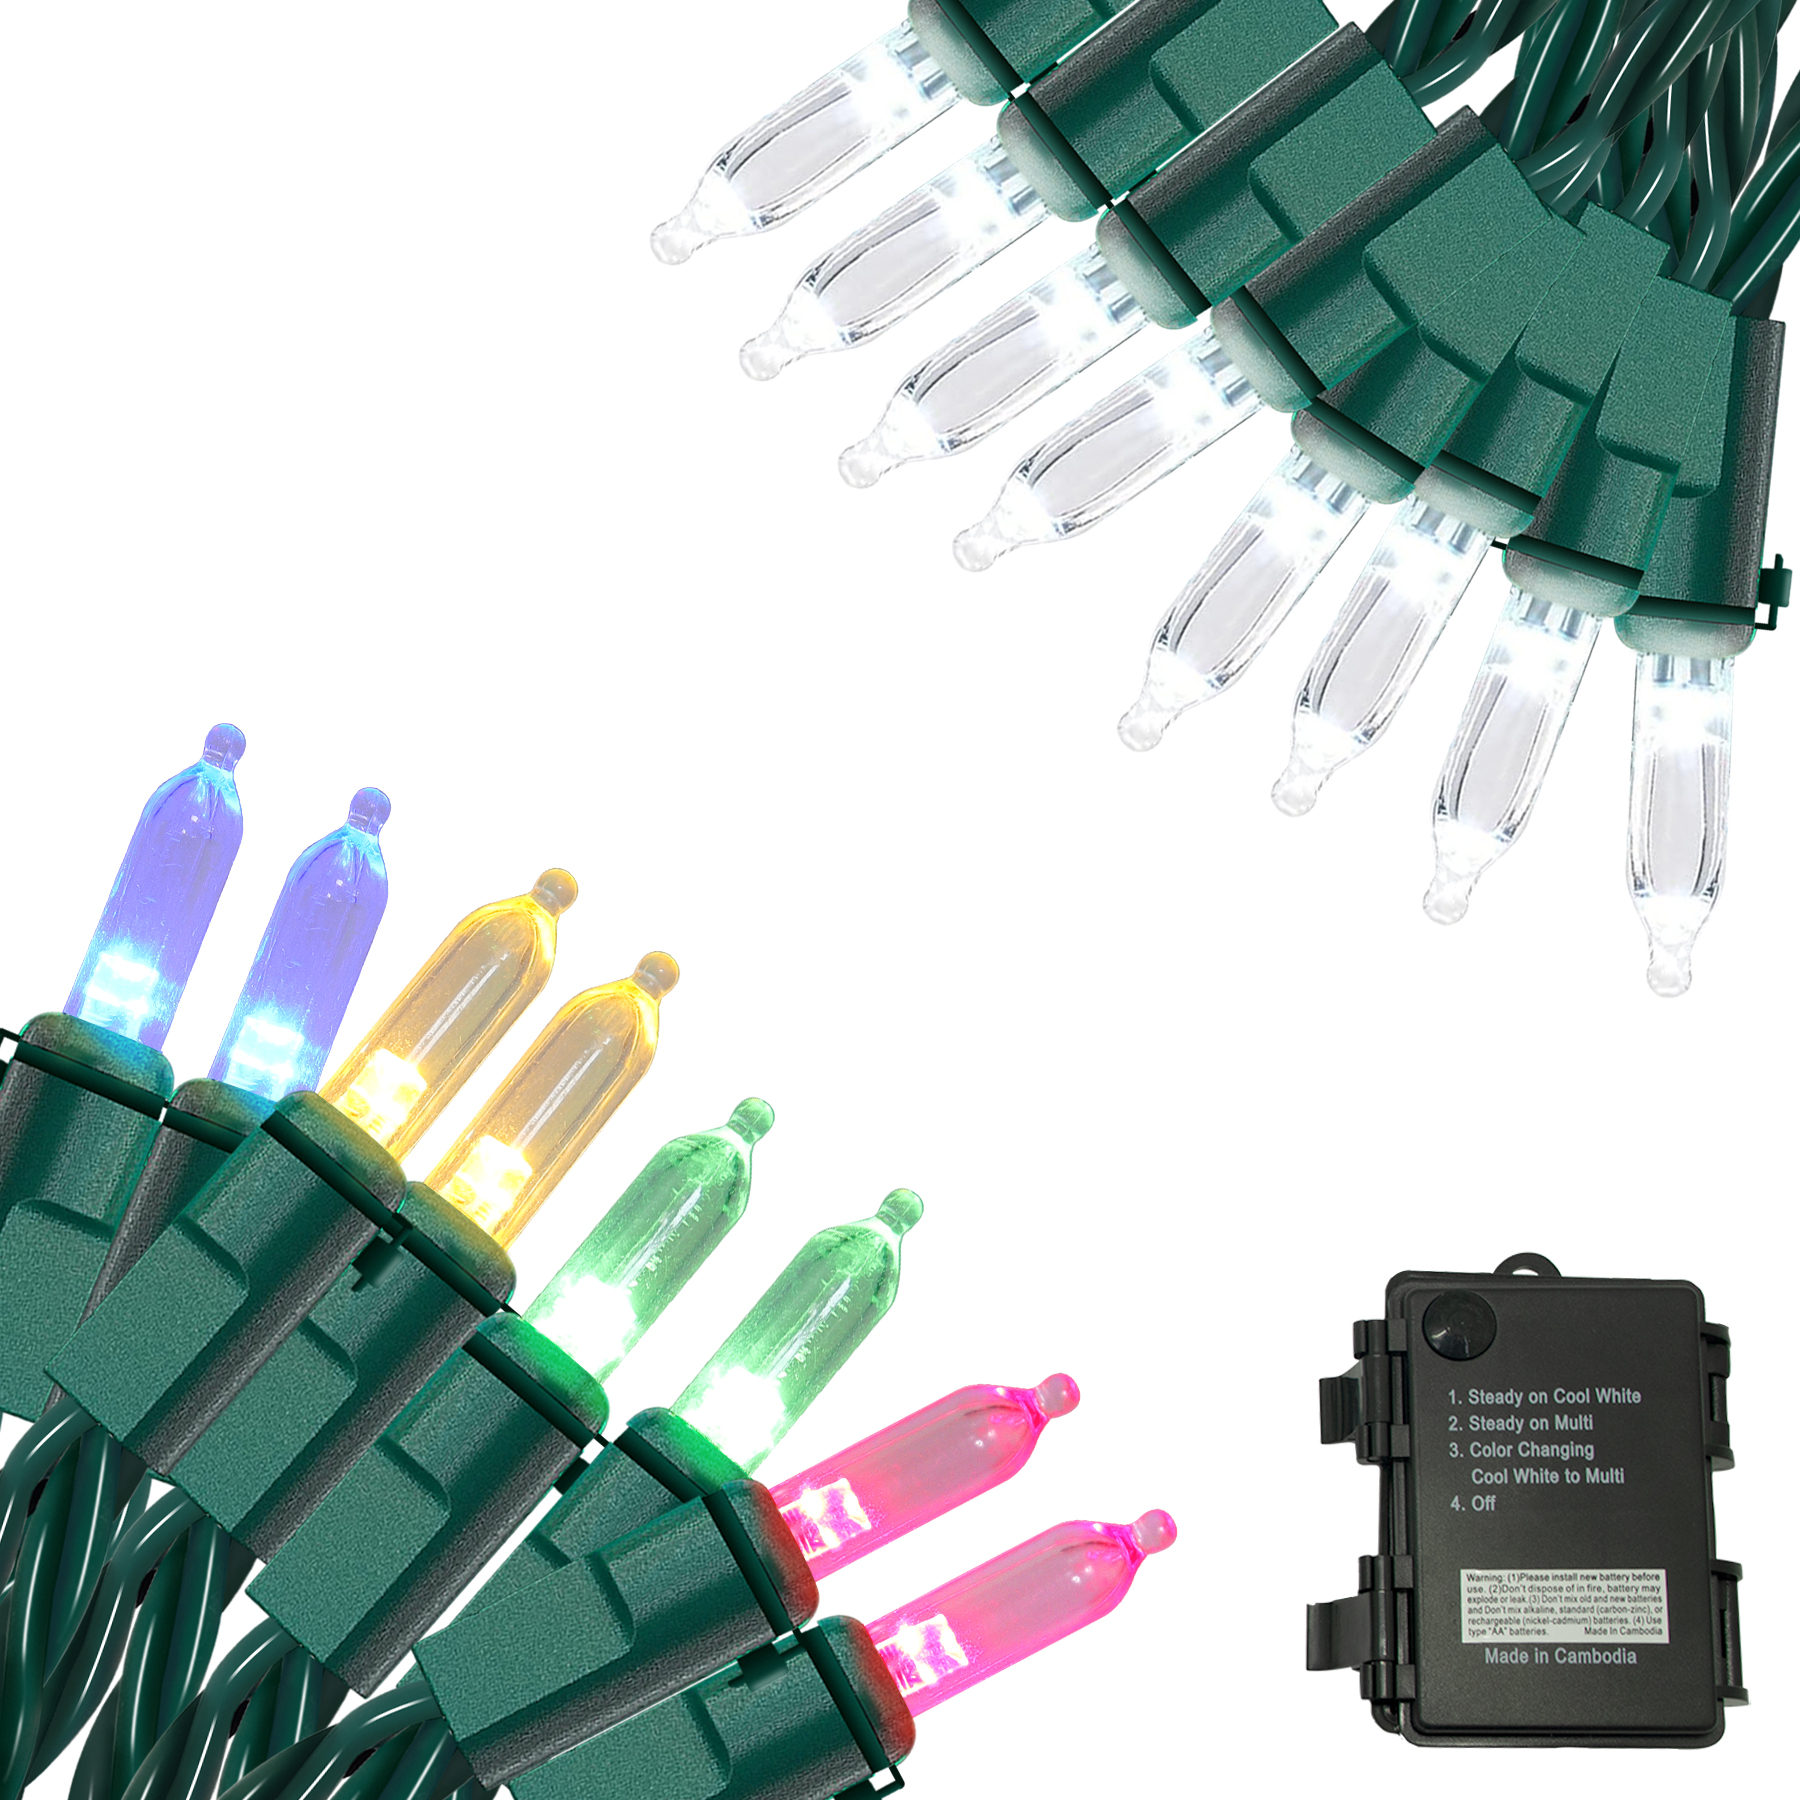 50 LED Battery Operated Lights Multi Green Wire